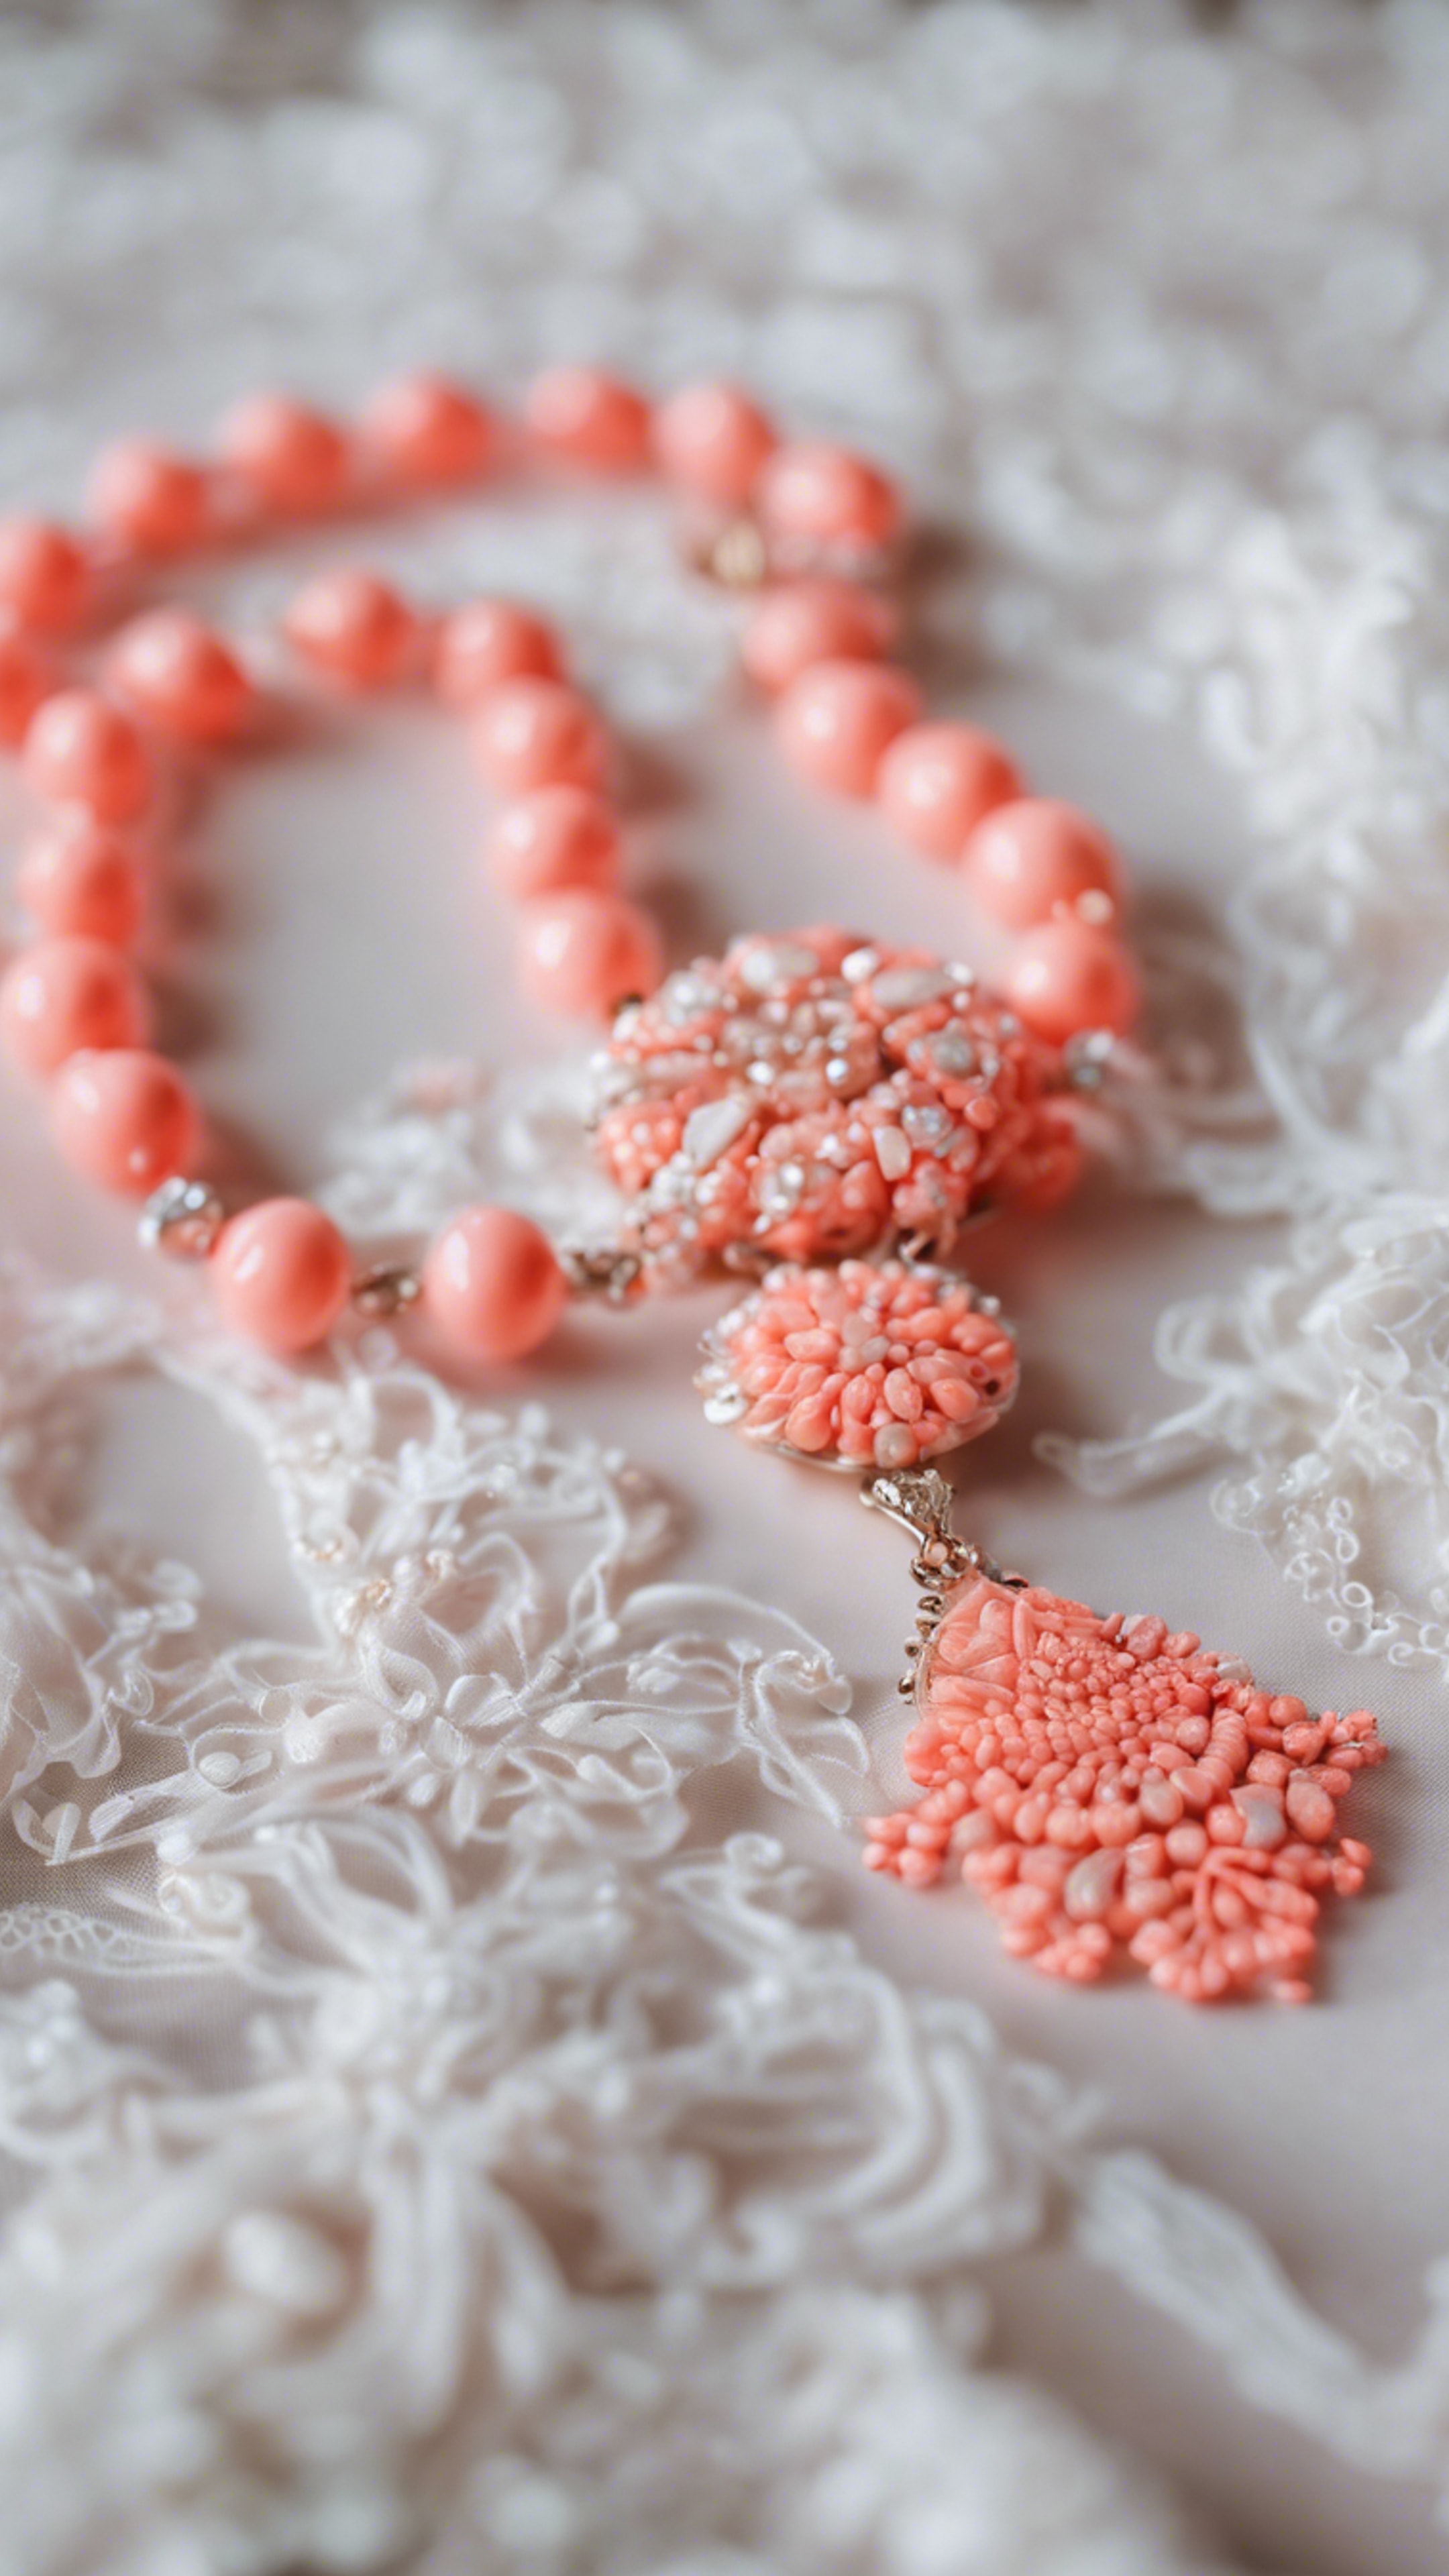 A preppy neon coral necklace against a white lace dress.壁紙[7558fb99fbaf41faa5f9]